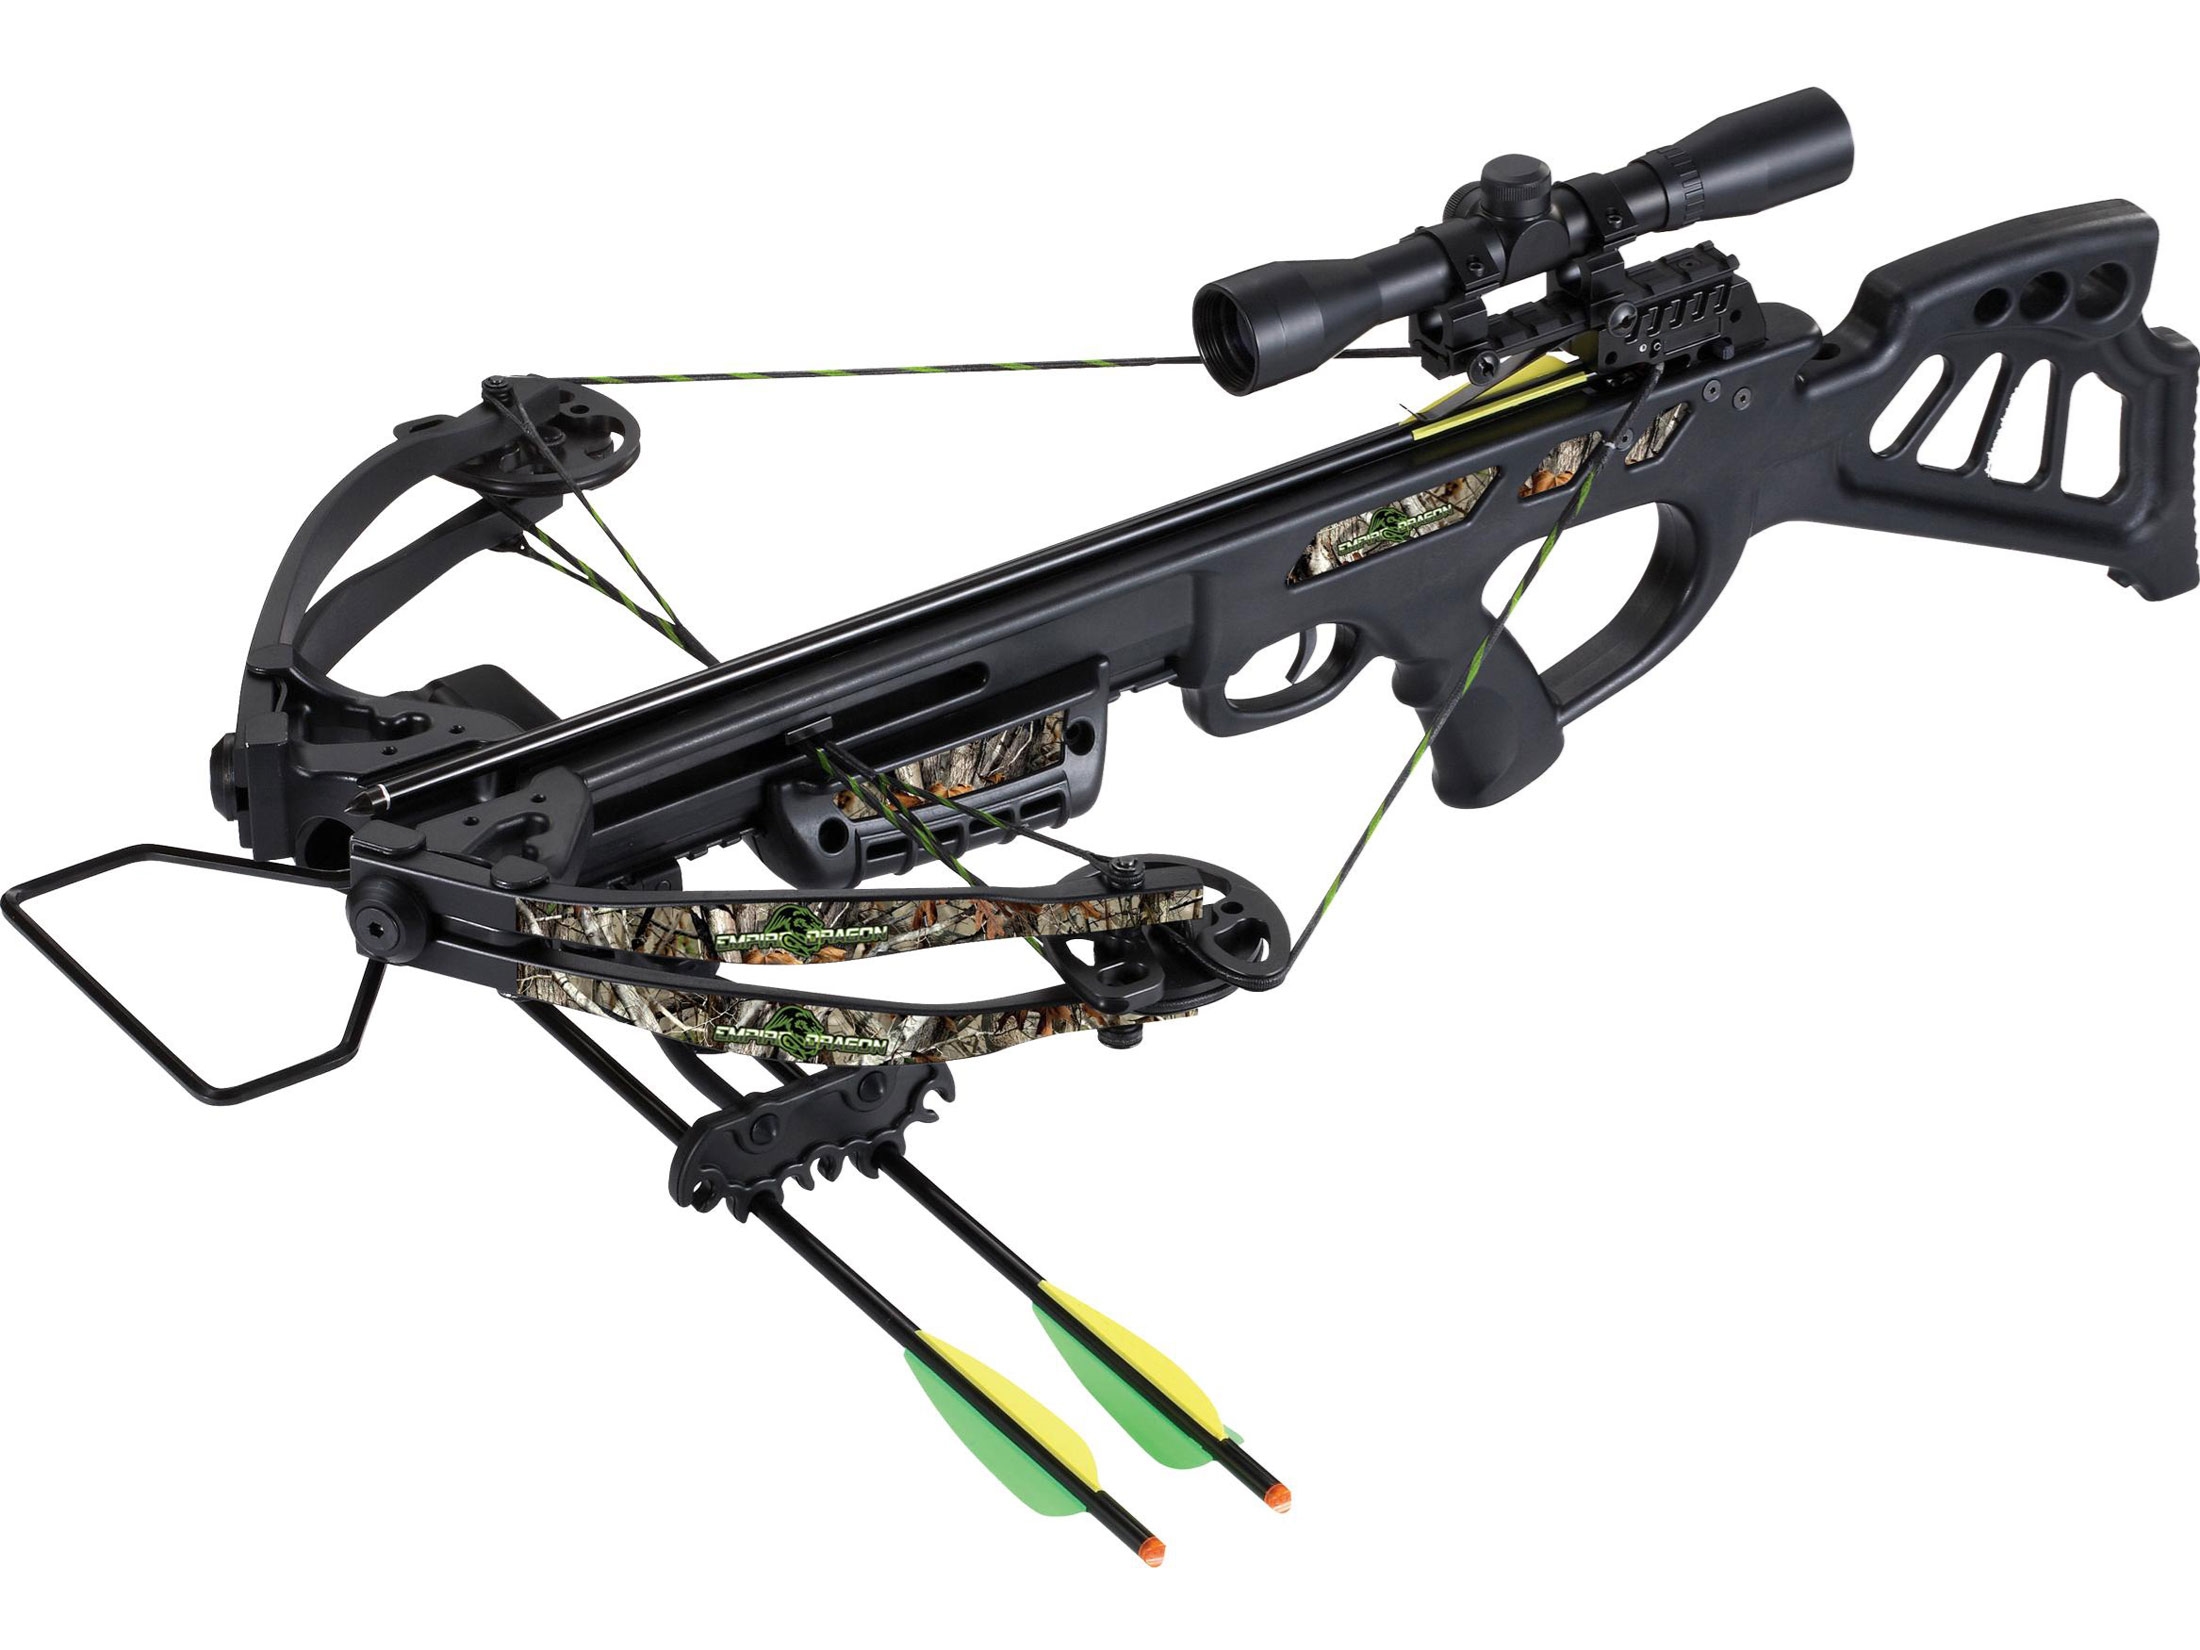 SA SPORTS EMPIRE DRAGON CROSSBOW PACKAGE W/SCOPE- 340FPS